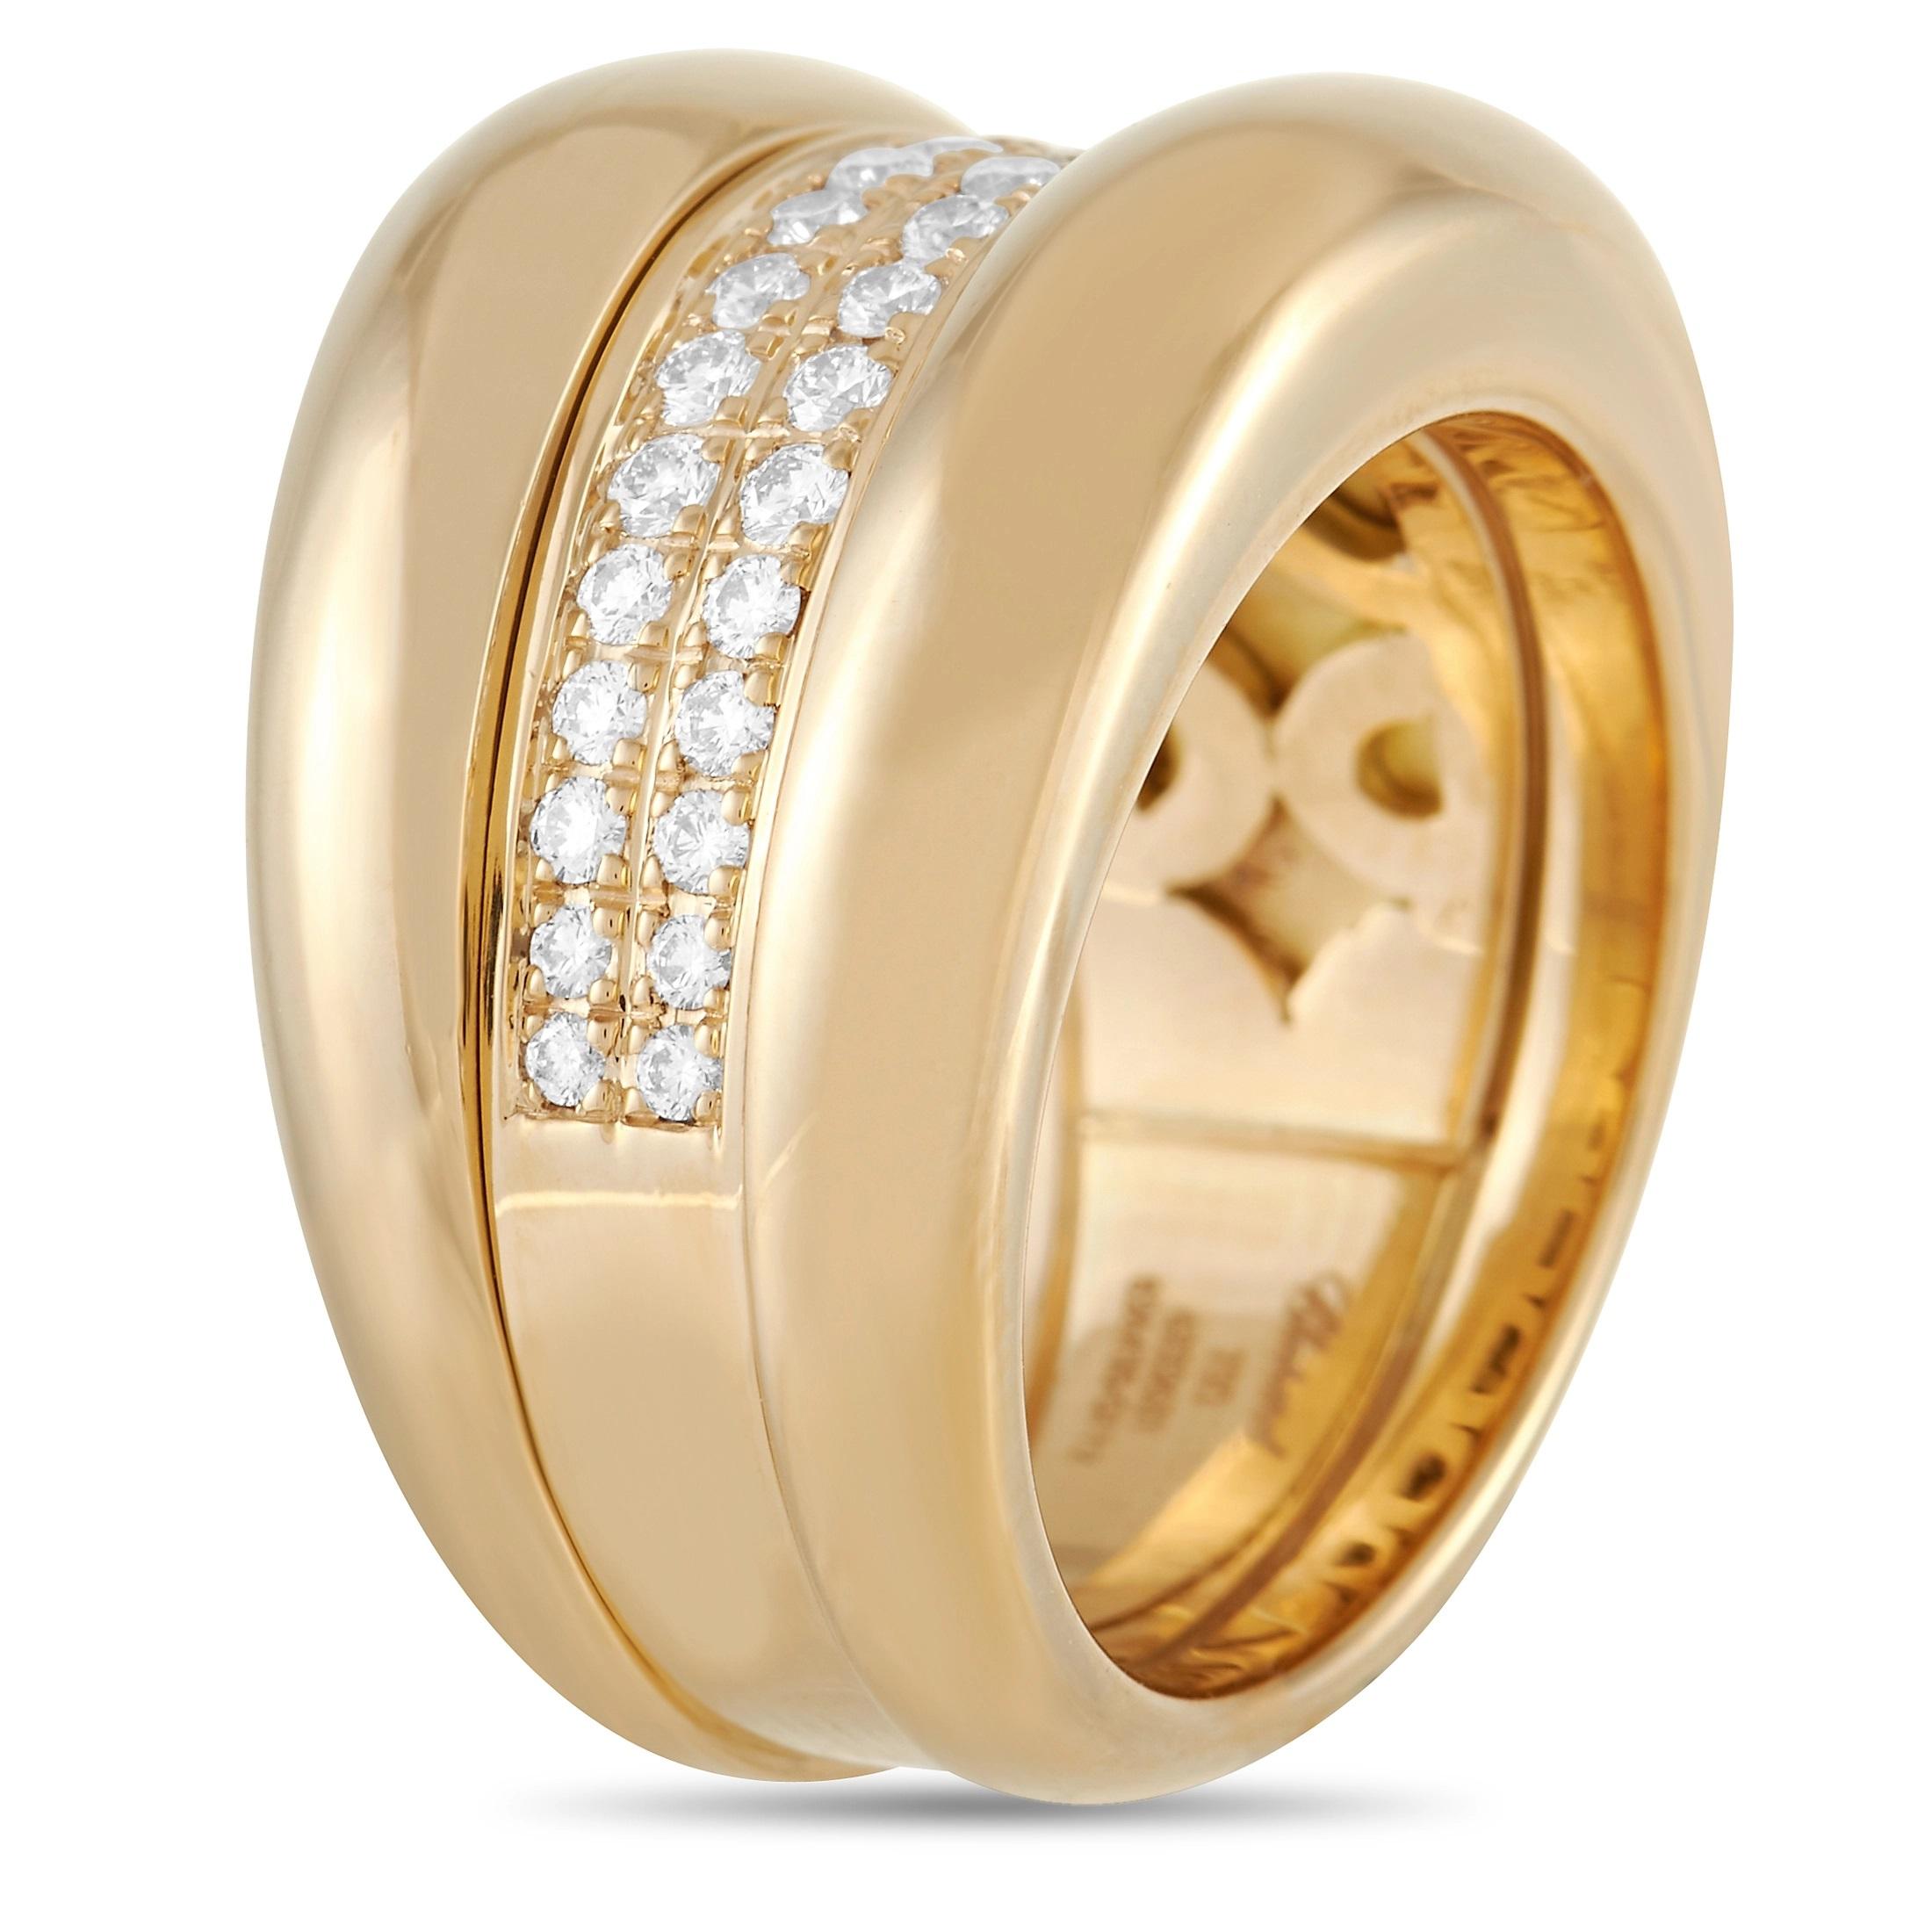 Made from 18K Yellow Gold, this glamorous ring from the Chopard La Strada collection is inherently luxurious. At the center of this opulent design, you’ll find dual rows of diamonds totaling 0.63 carats. This exquisite piece measures 10mm wide and